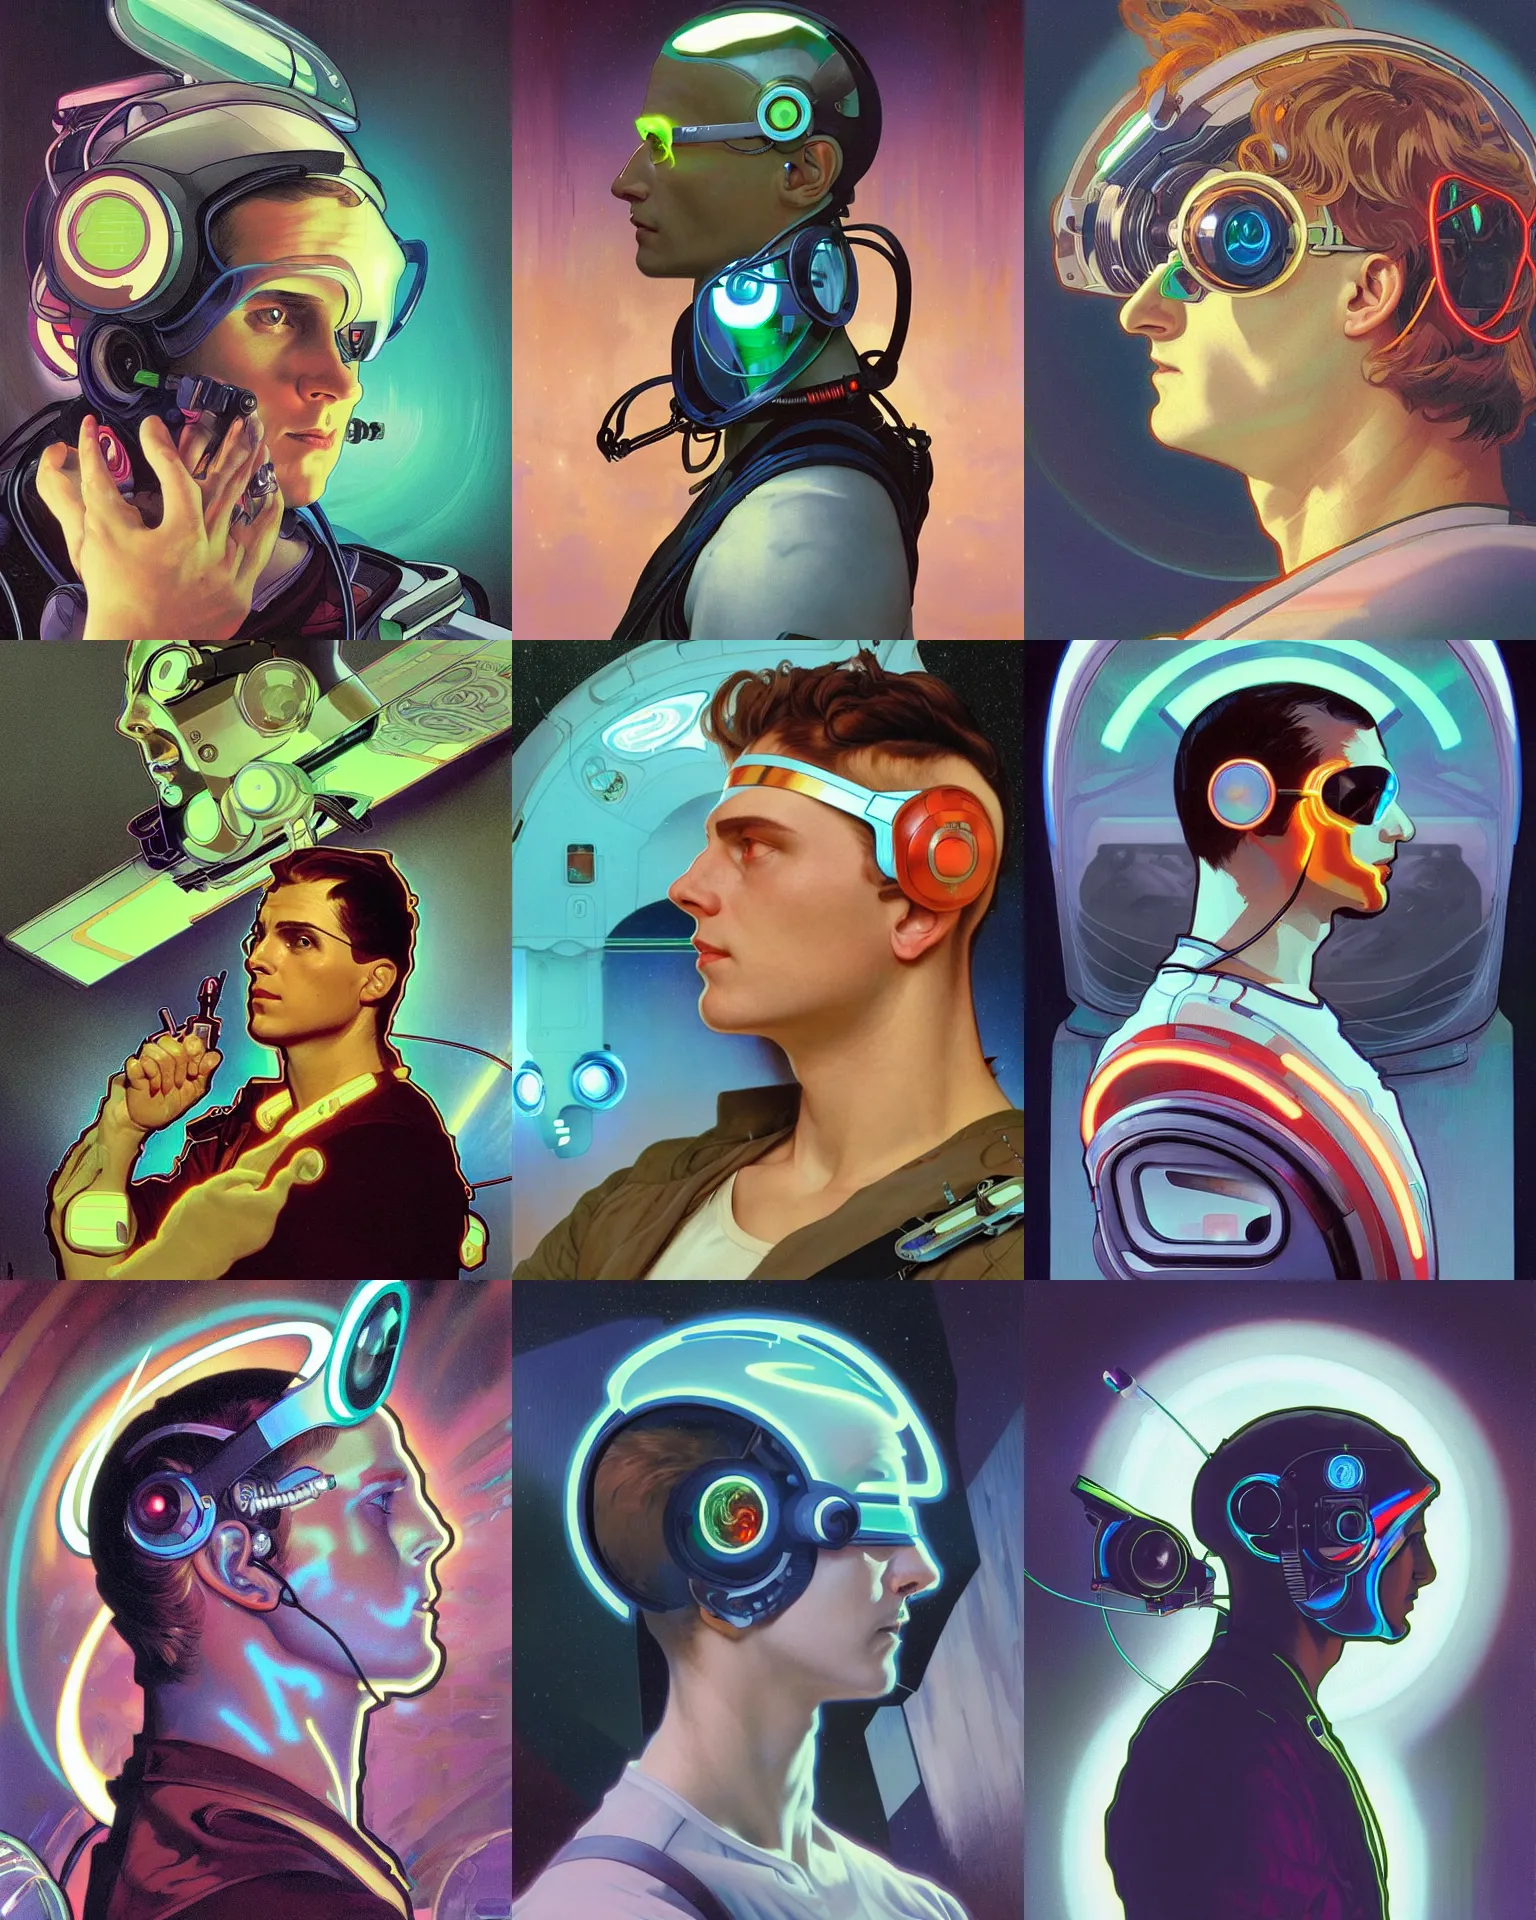 Prompt: side view future coder man, sleek cyclops display over eyes and glowing headset, neon accents, holographic colors, desaturated headshot portrait digital painting by alphonse mucha, donoto giancola, dean cornwall, rhads, john berkey, tom whalen, alex grey, astronaut cyberpunk electric lights profile